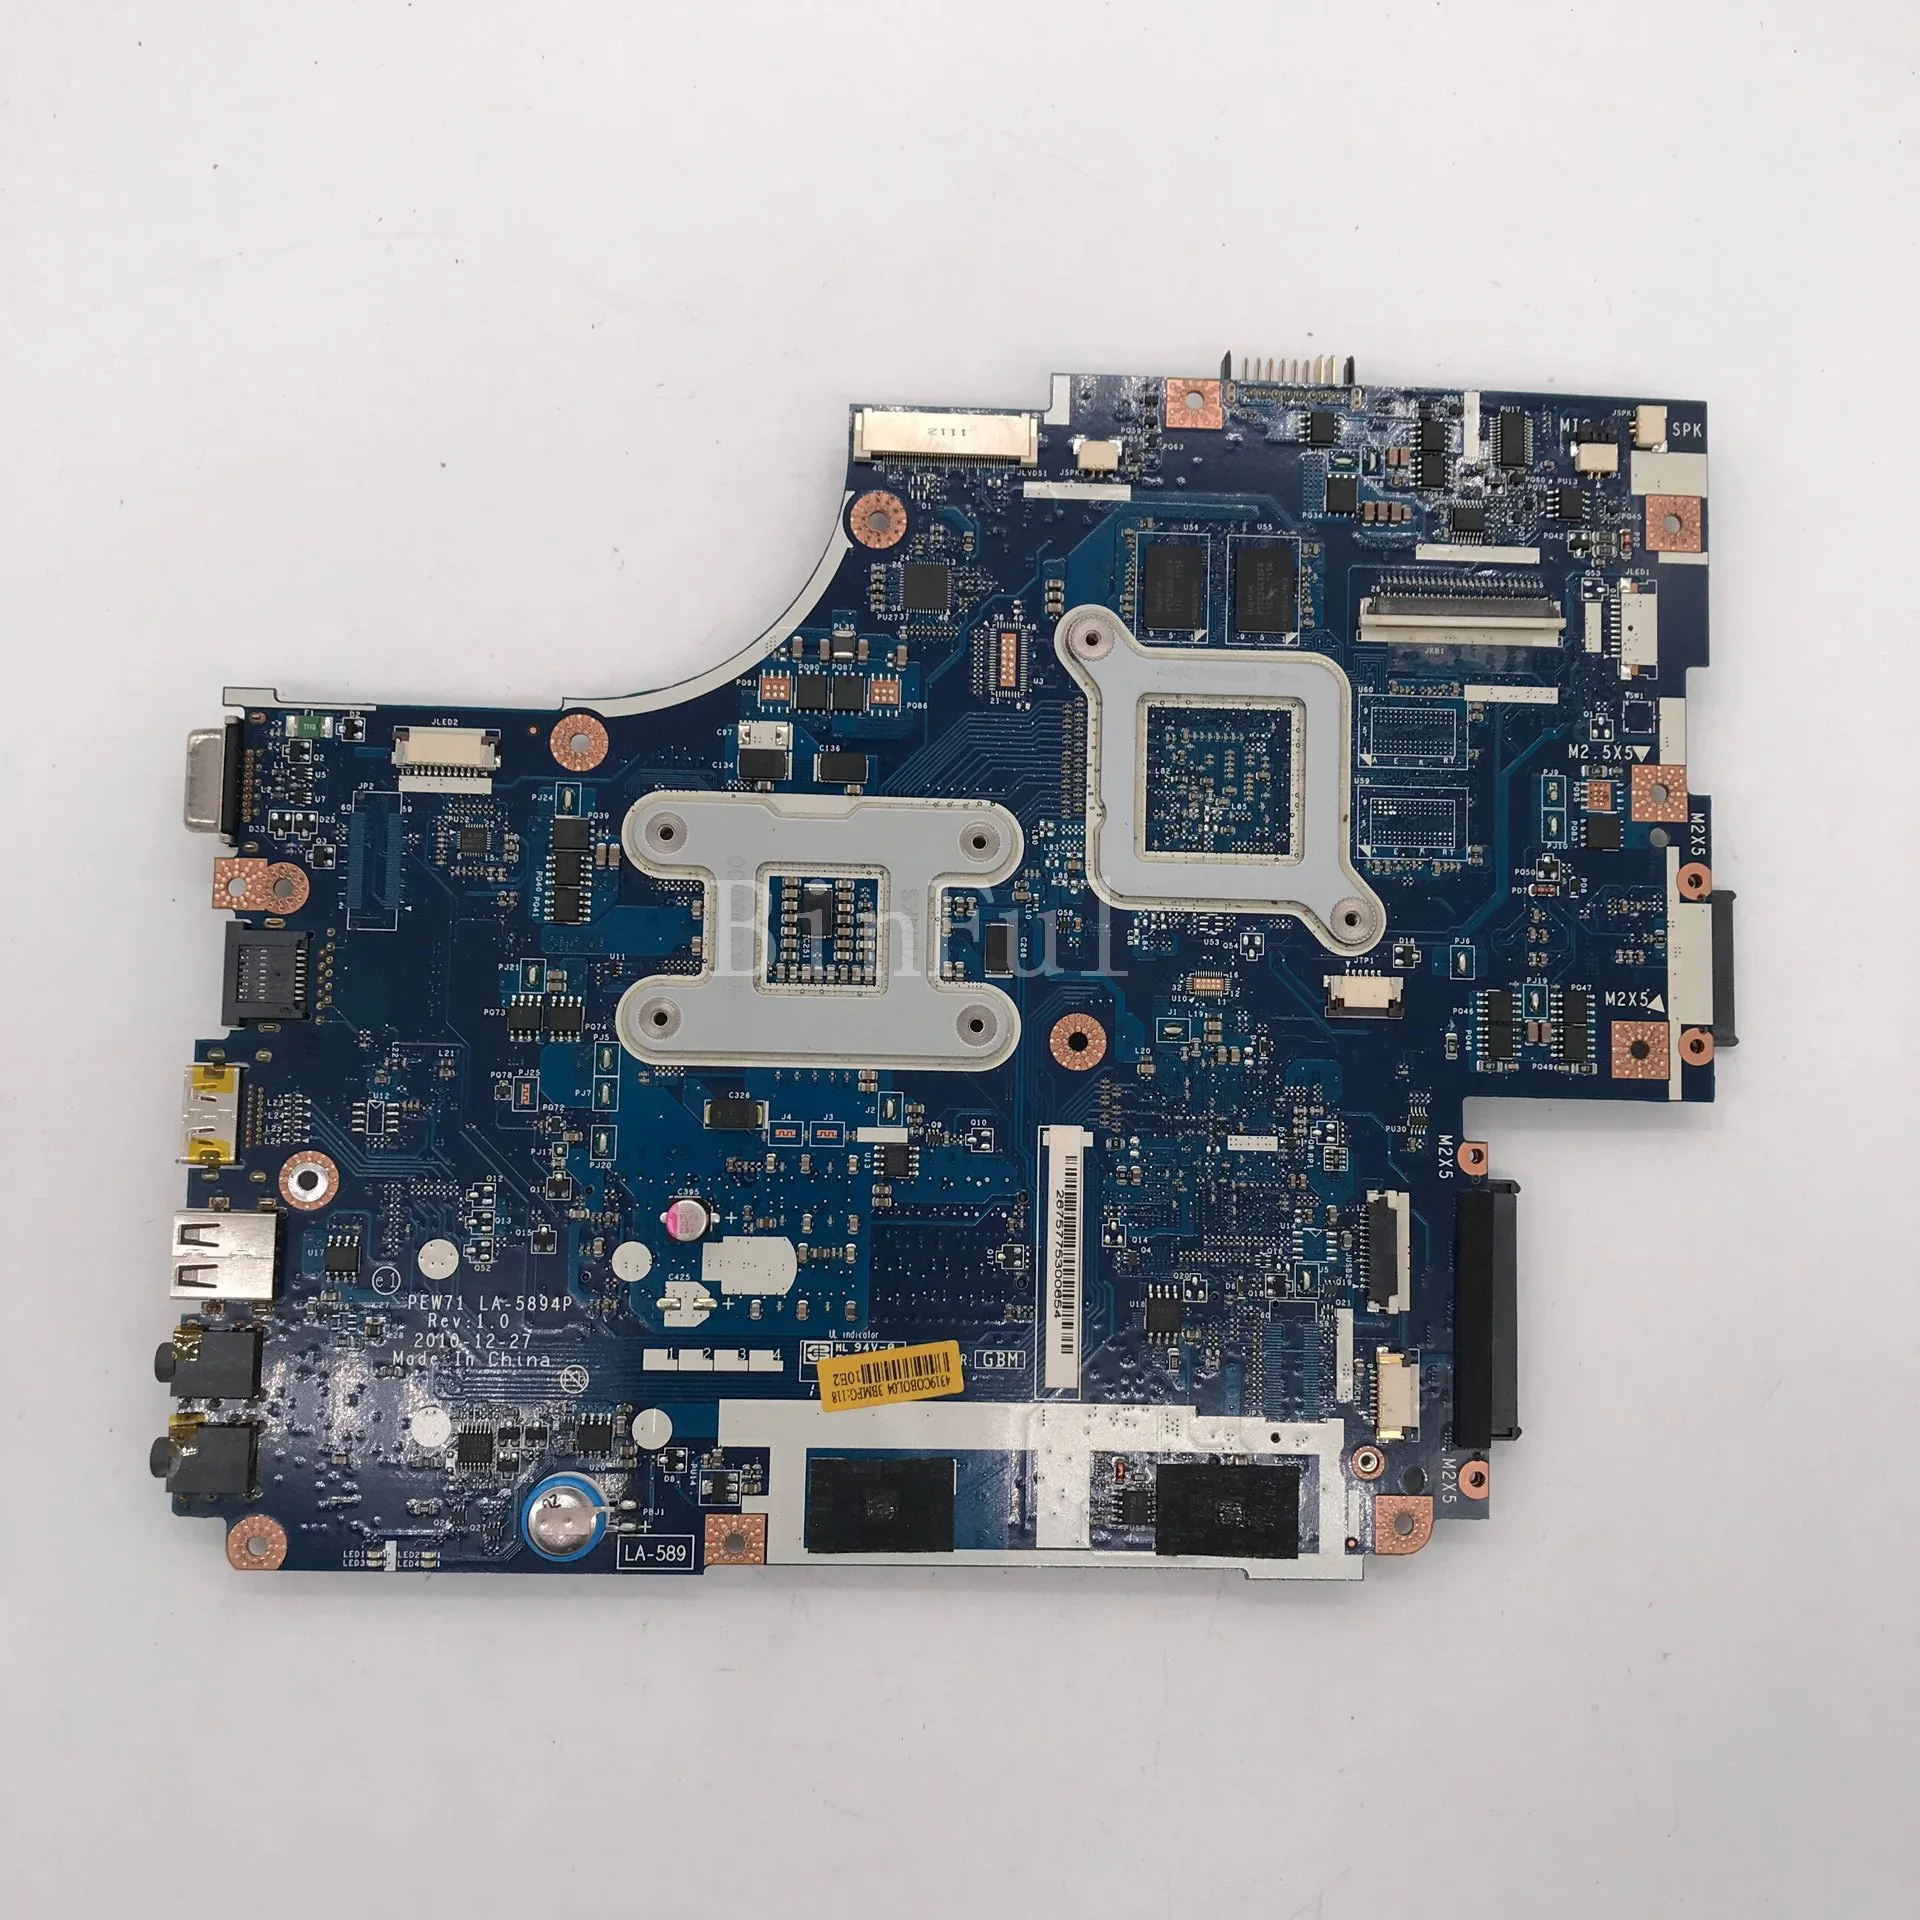 the best pc motherboard Laptop Motherboard For Acer Aspire 5742 5742G 5741 PEW71 LA-5894P MBRB902001 MB.RB902.001 Mainboard HM55 100% Full Tested cheapest motherboard for pc